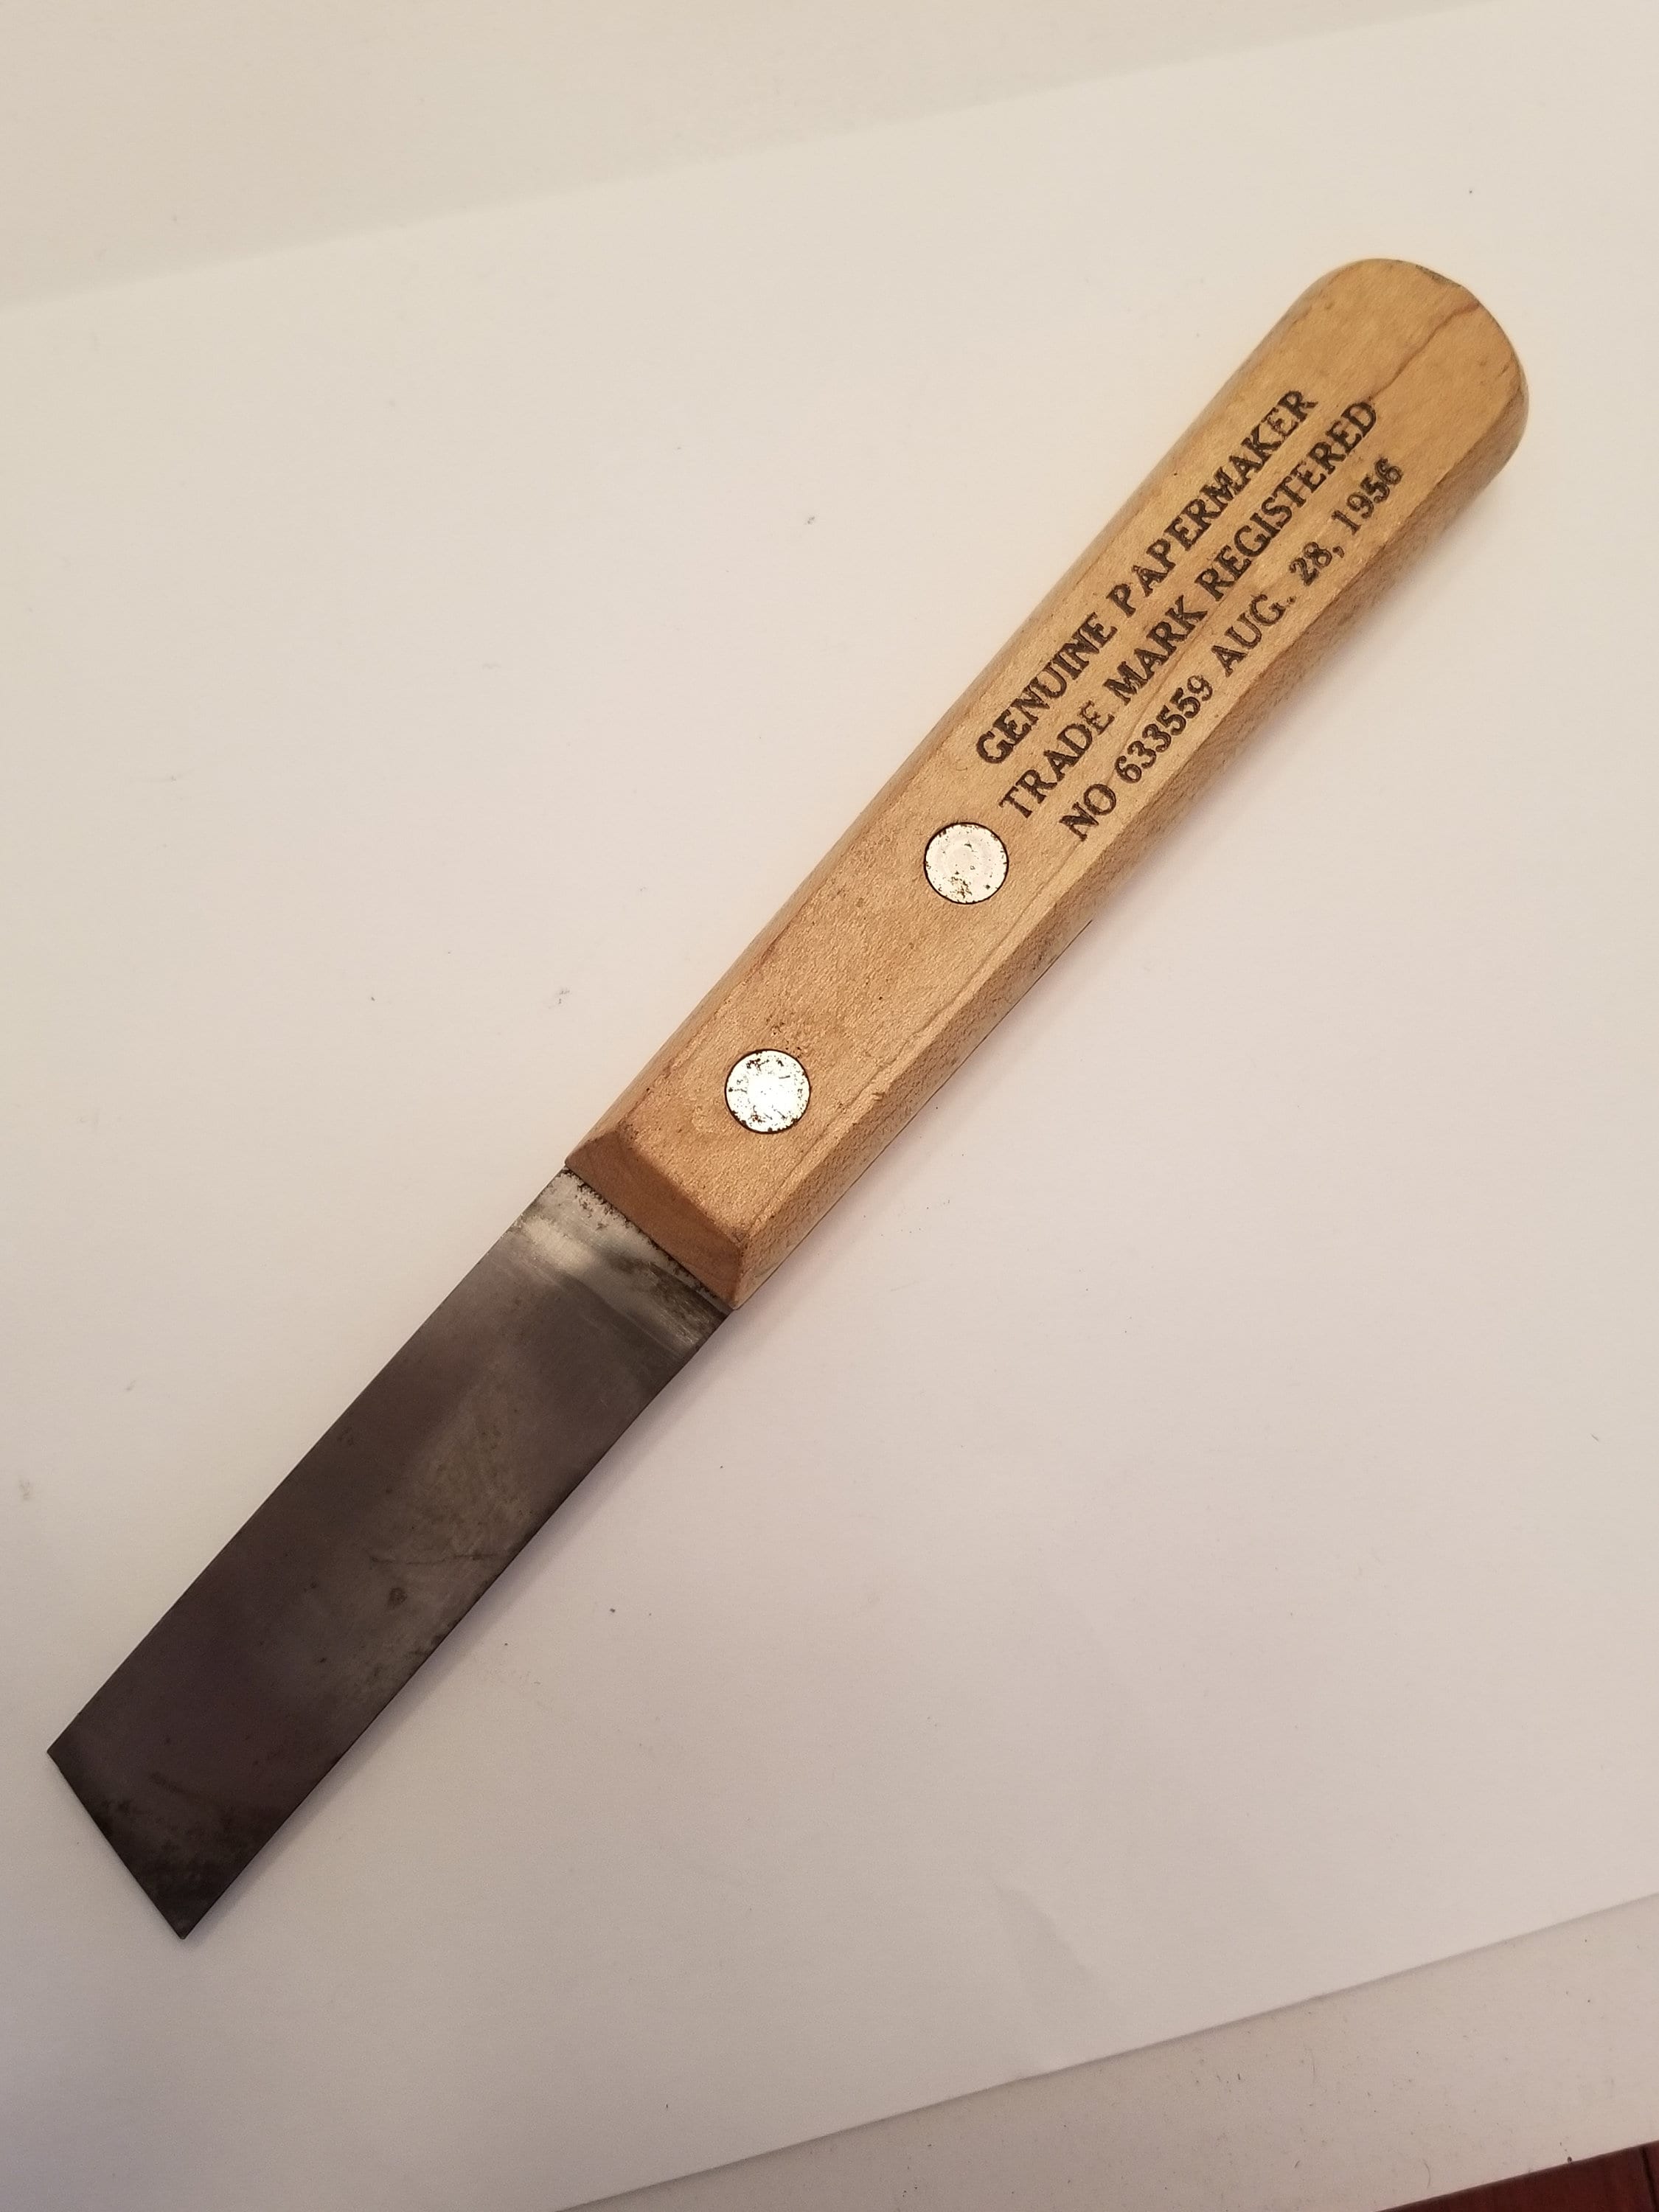 Make sure to buy Authentic Fixwell Knives and beware of counterfeits